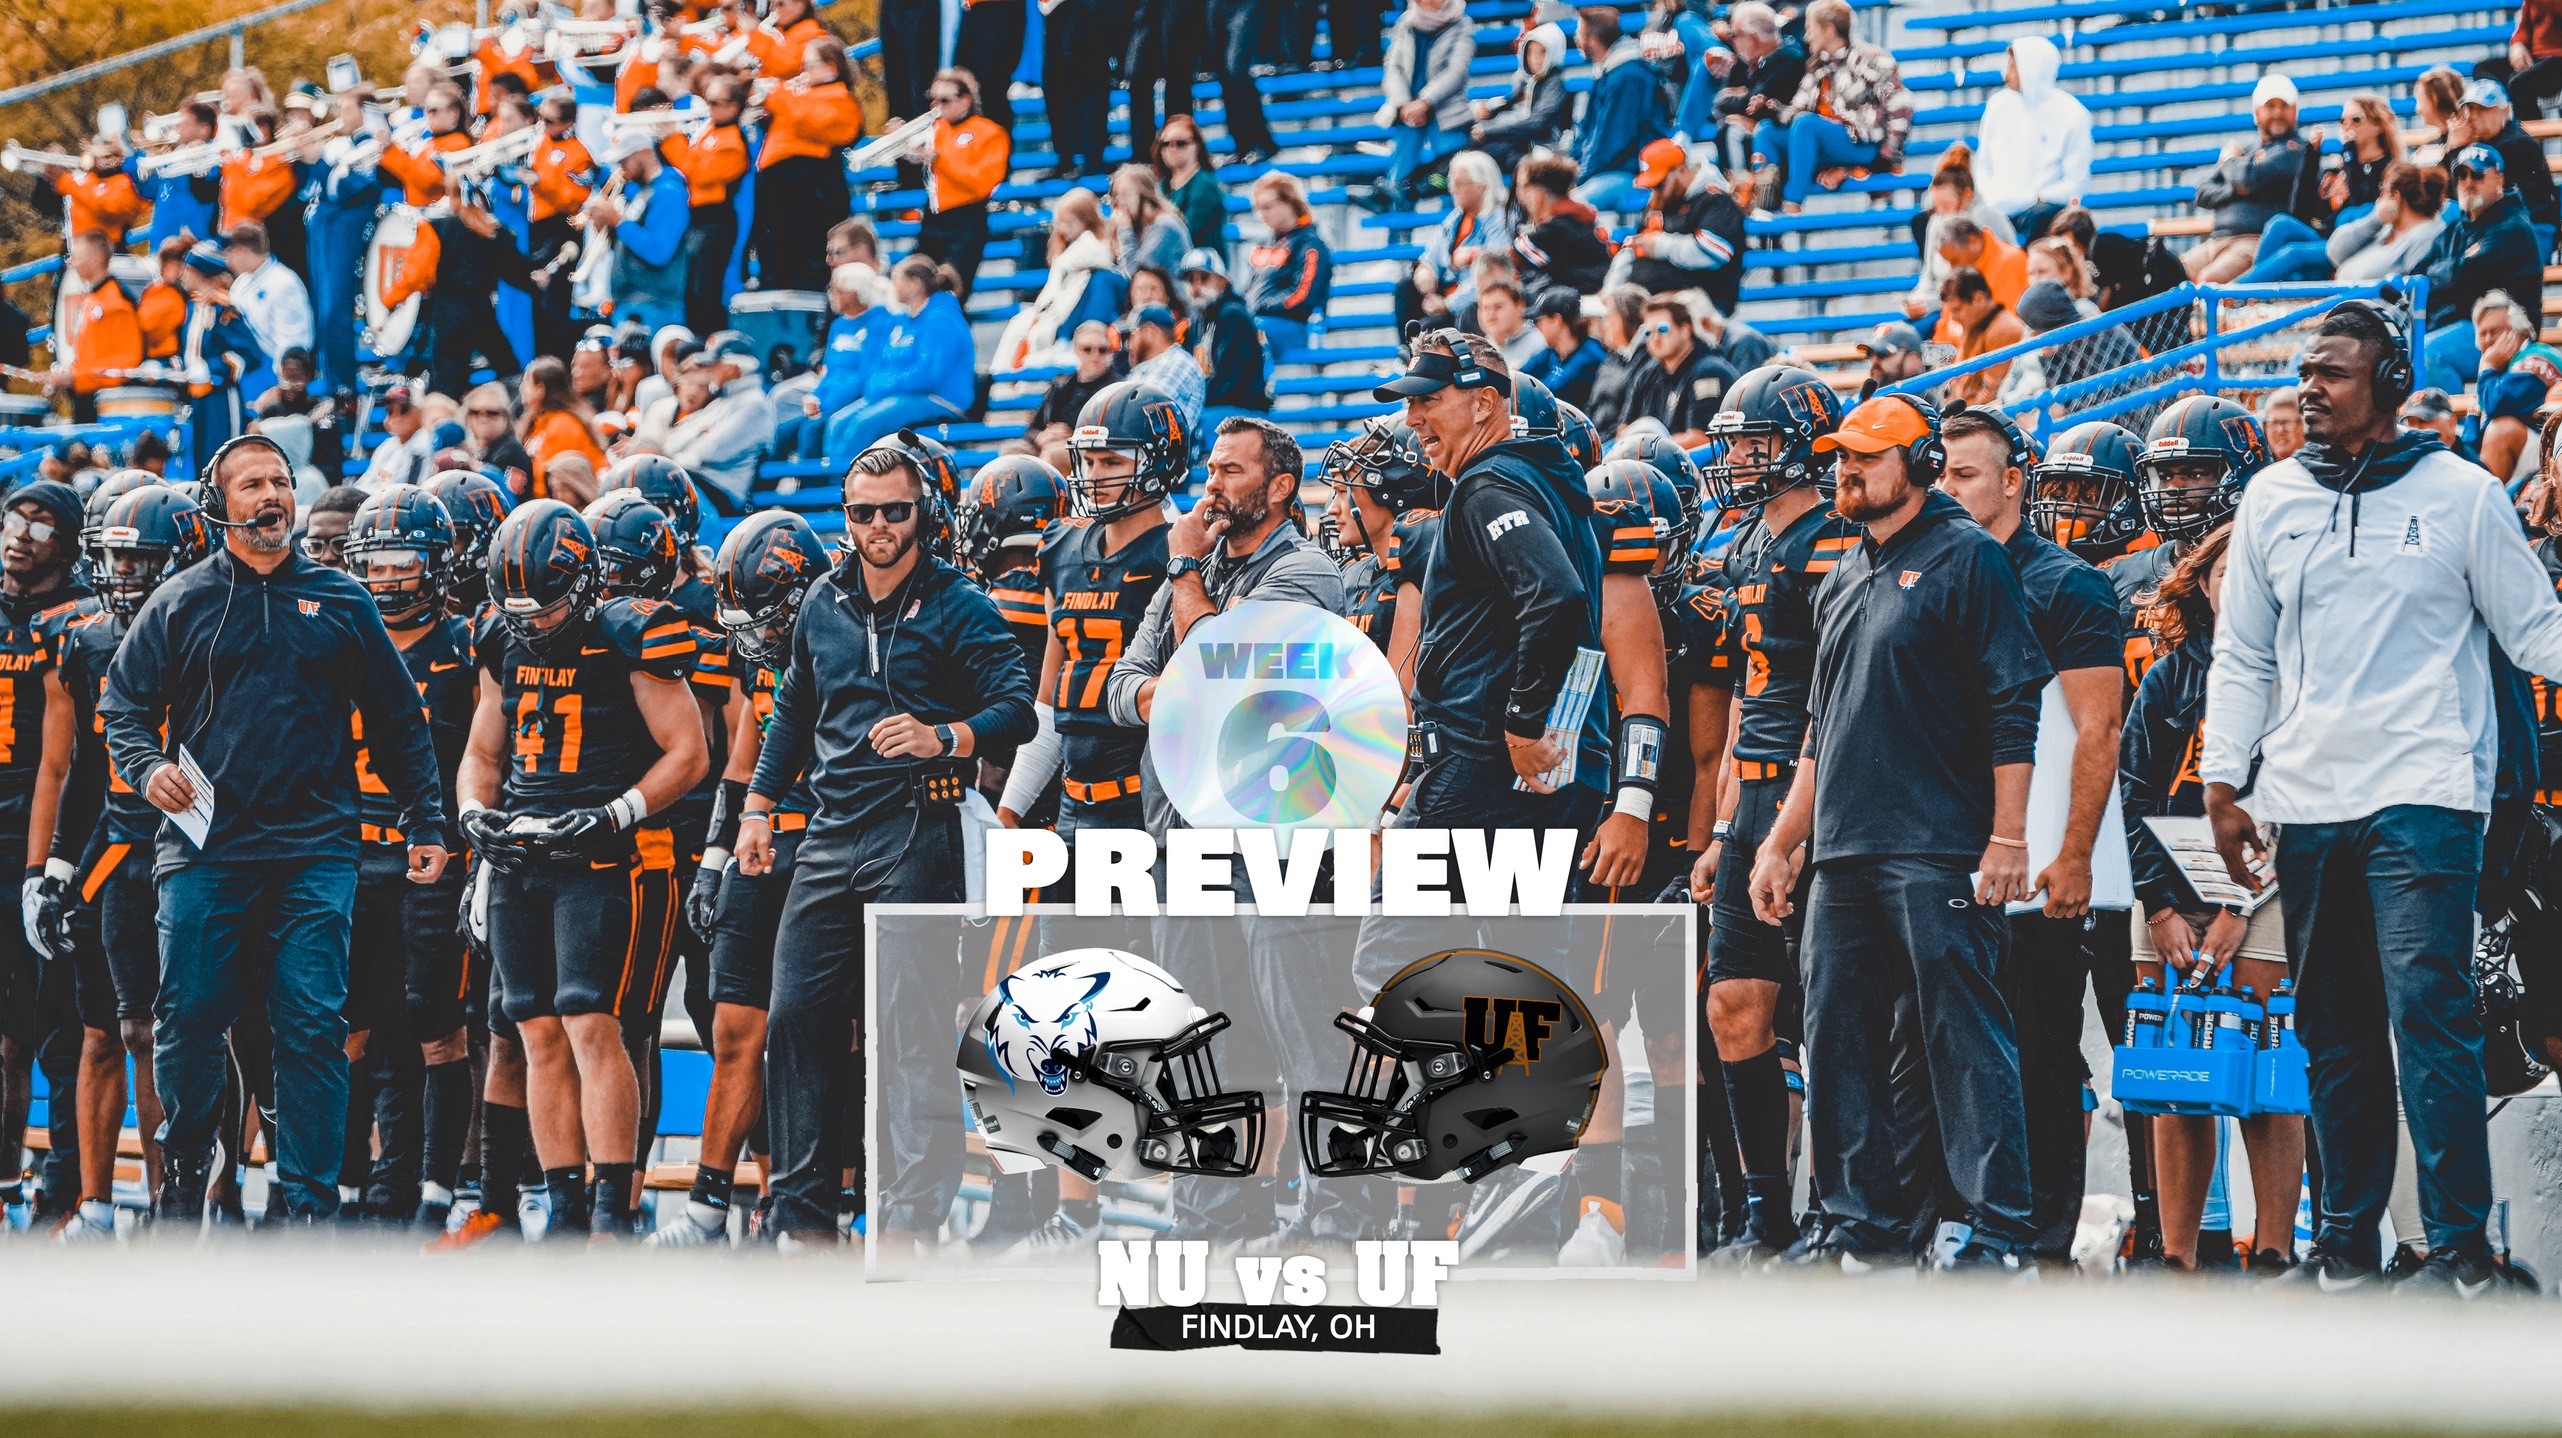 Week 6 Preview | Oilers Welcome Timberwolves on Homecoming